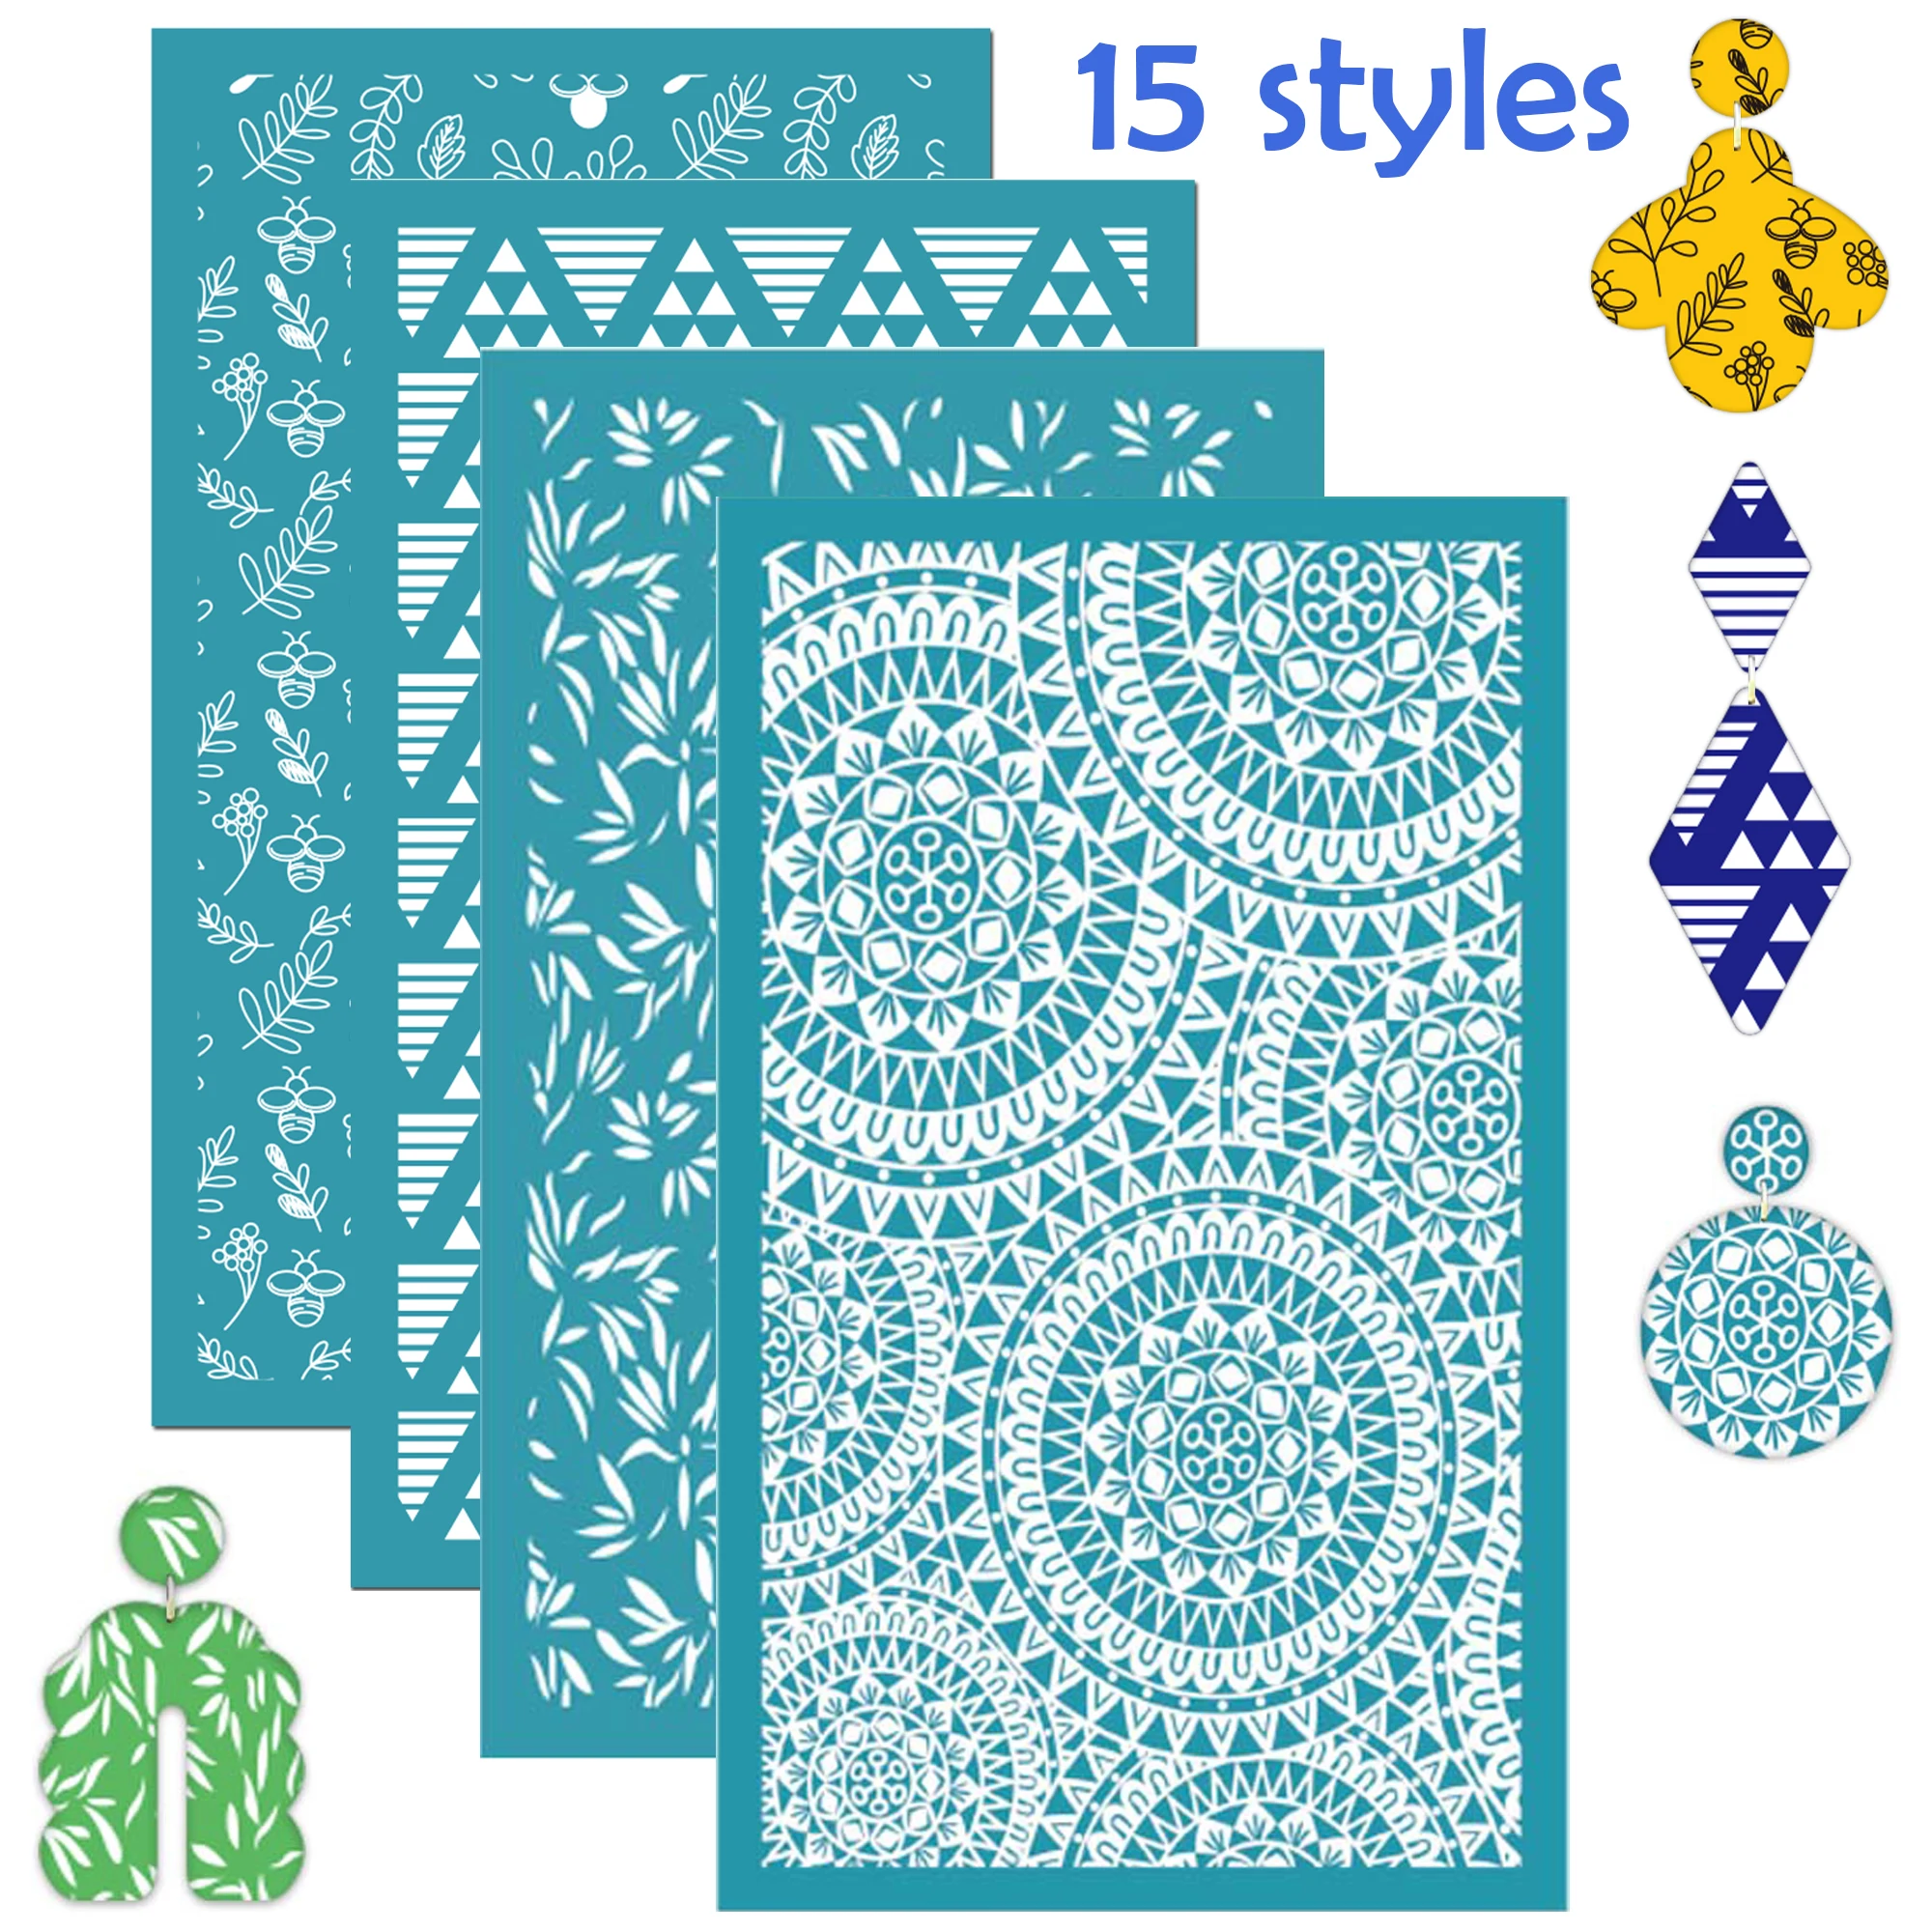 

Polymer Clay Silk Screen Stencils Reusable Silkscreen Print Kit for Printing Clay Stamps Jewelry Earrings Decoration Template